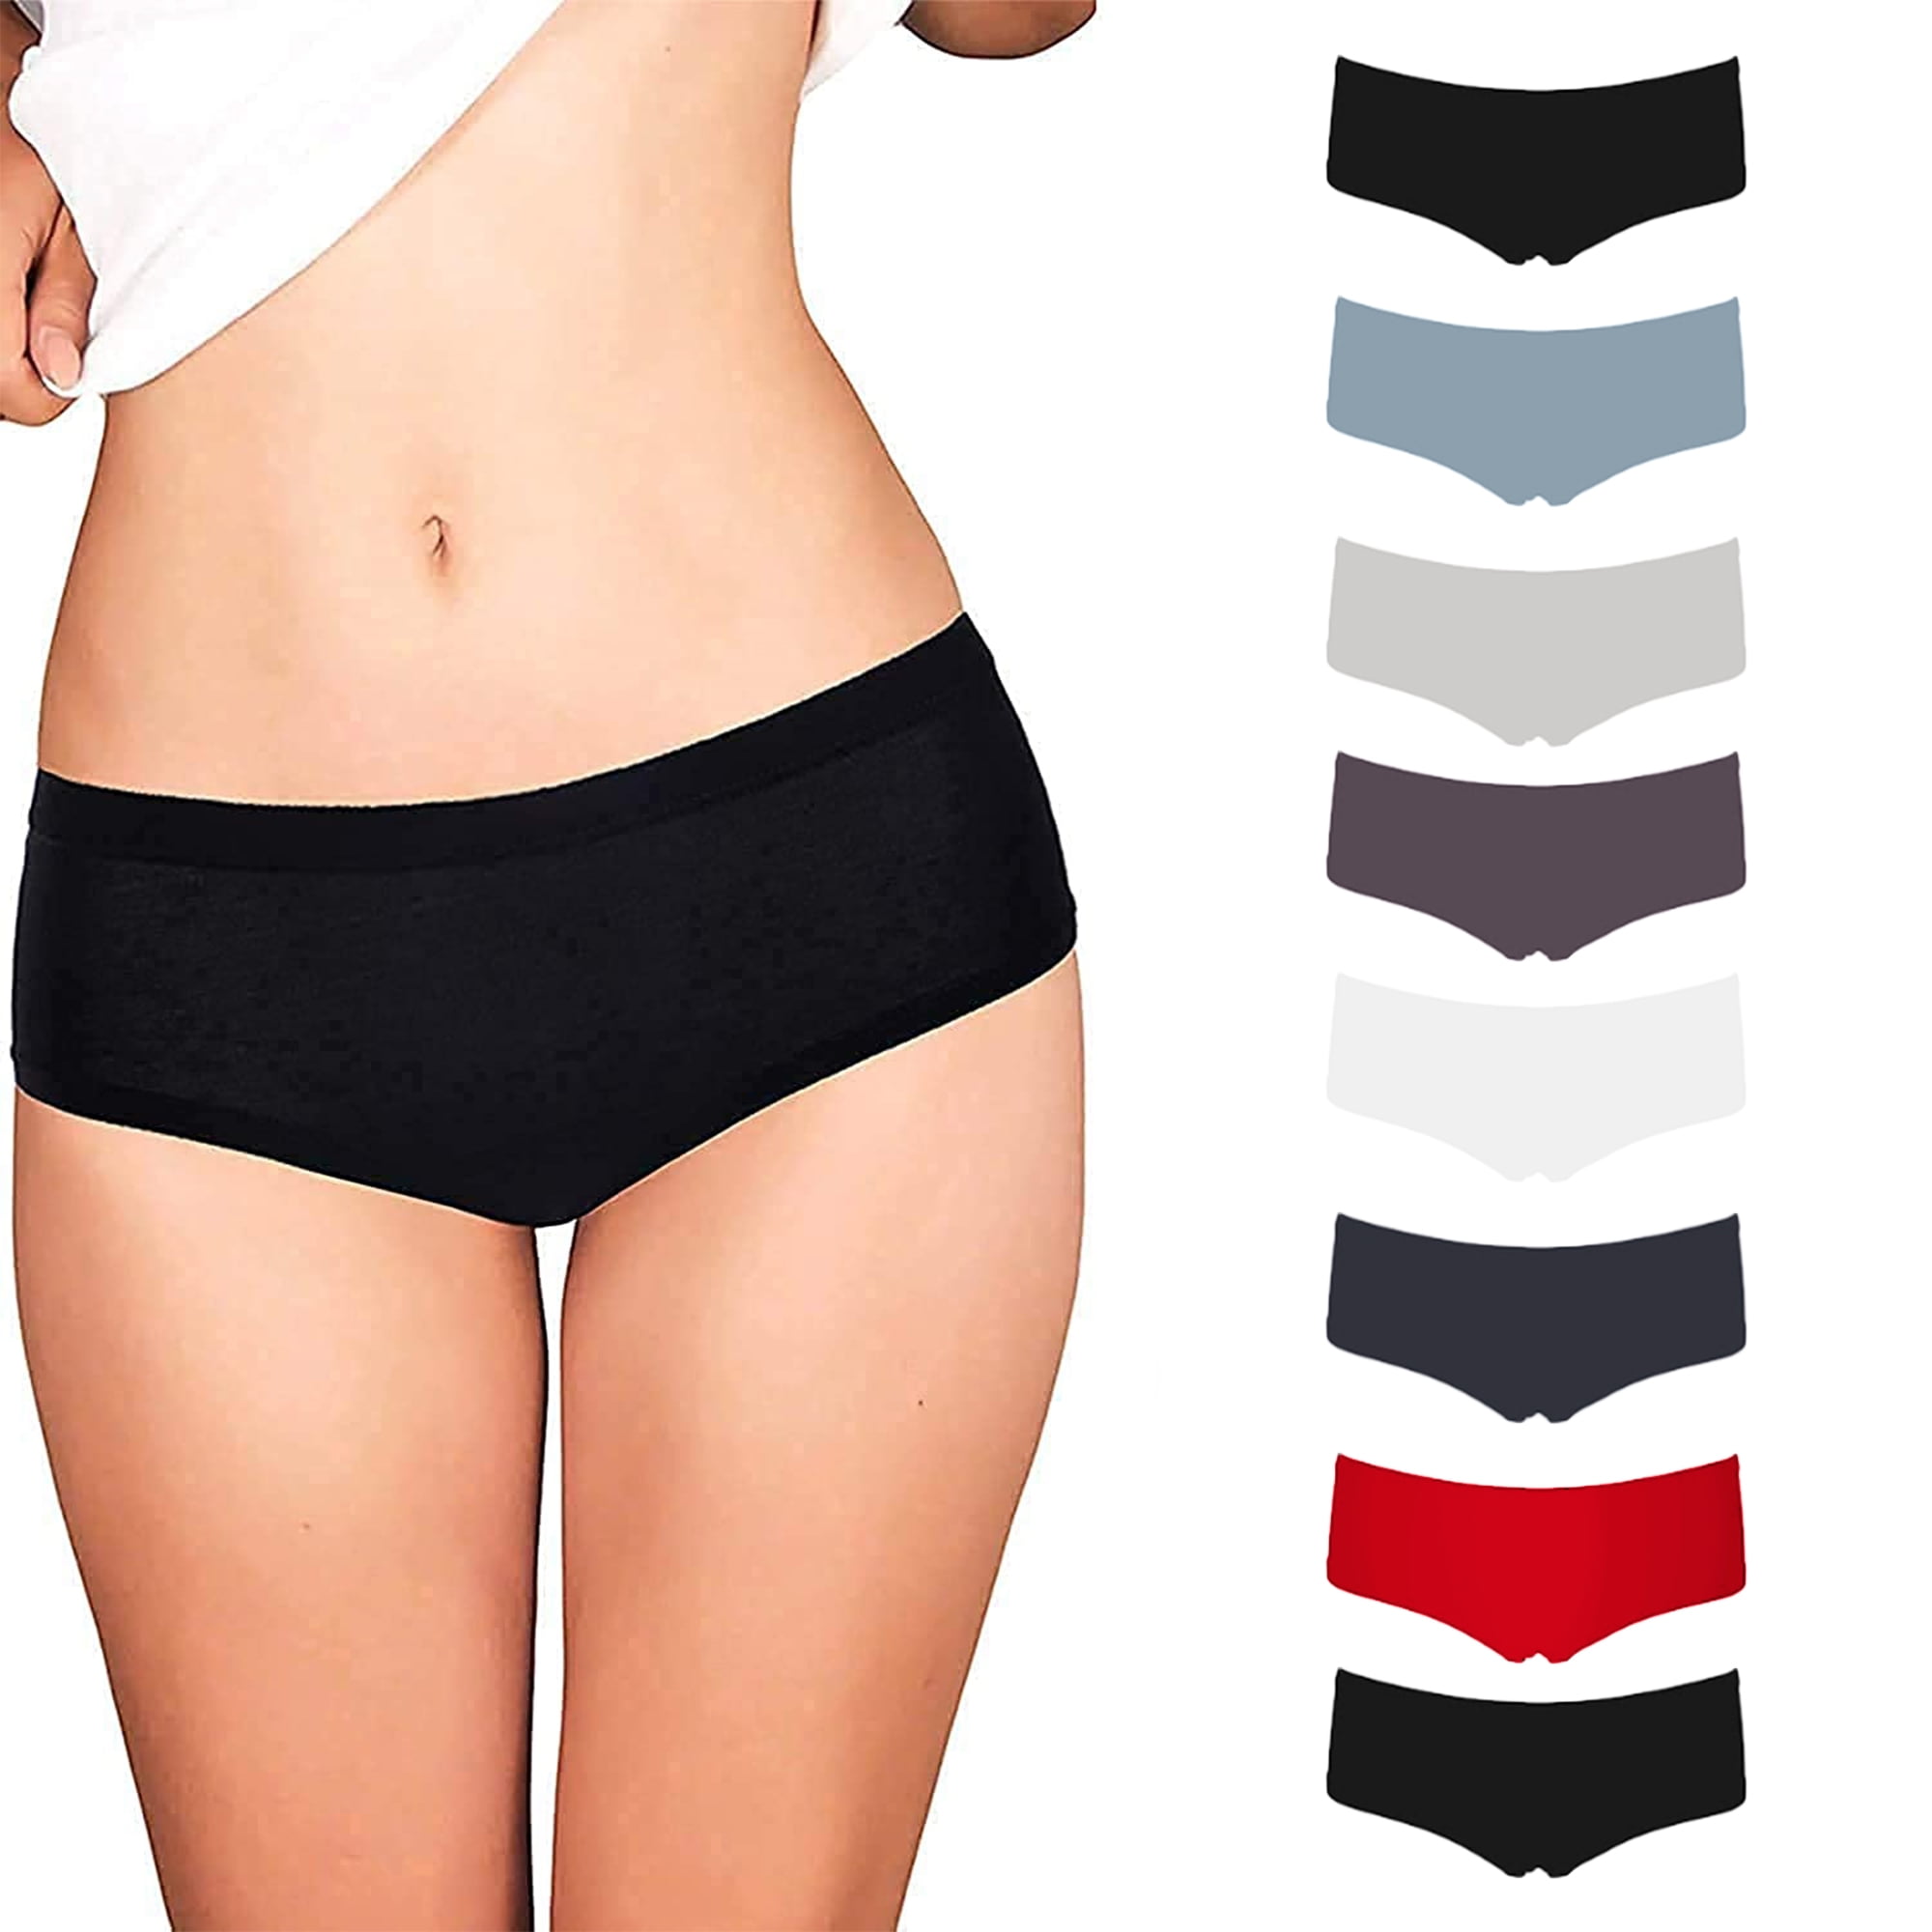 Emprella Womens Lace Underwear Hipster Panties Cotton-Spandex - 5 Pack  Colors and Patterns May Vary,Assorted - multi L - 5 requests